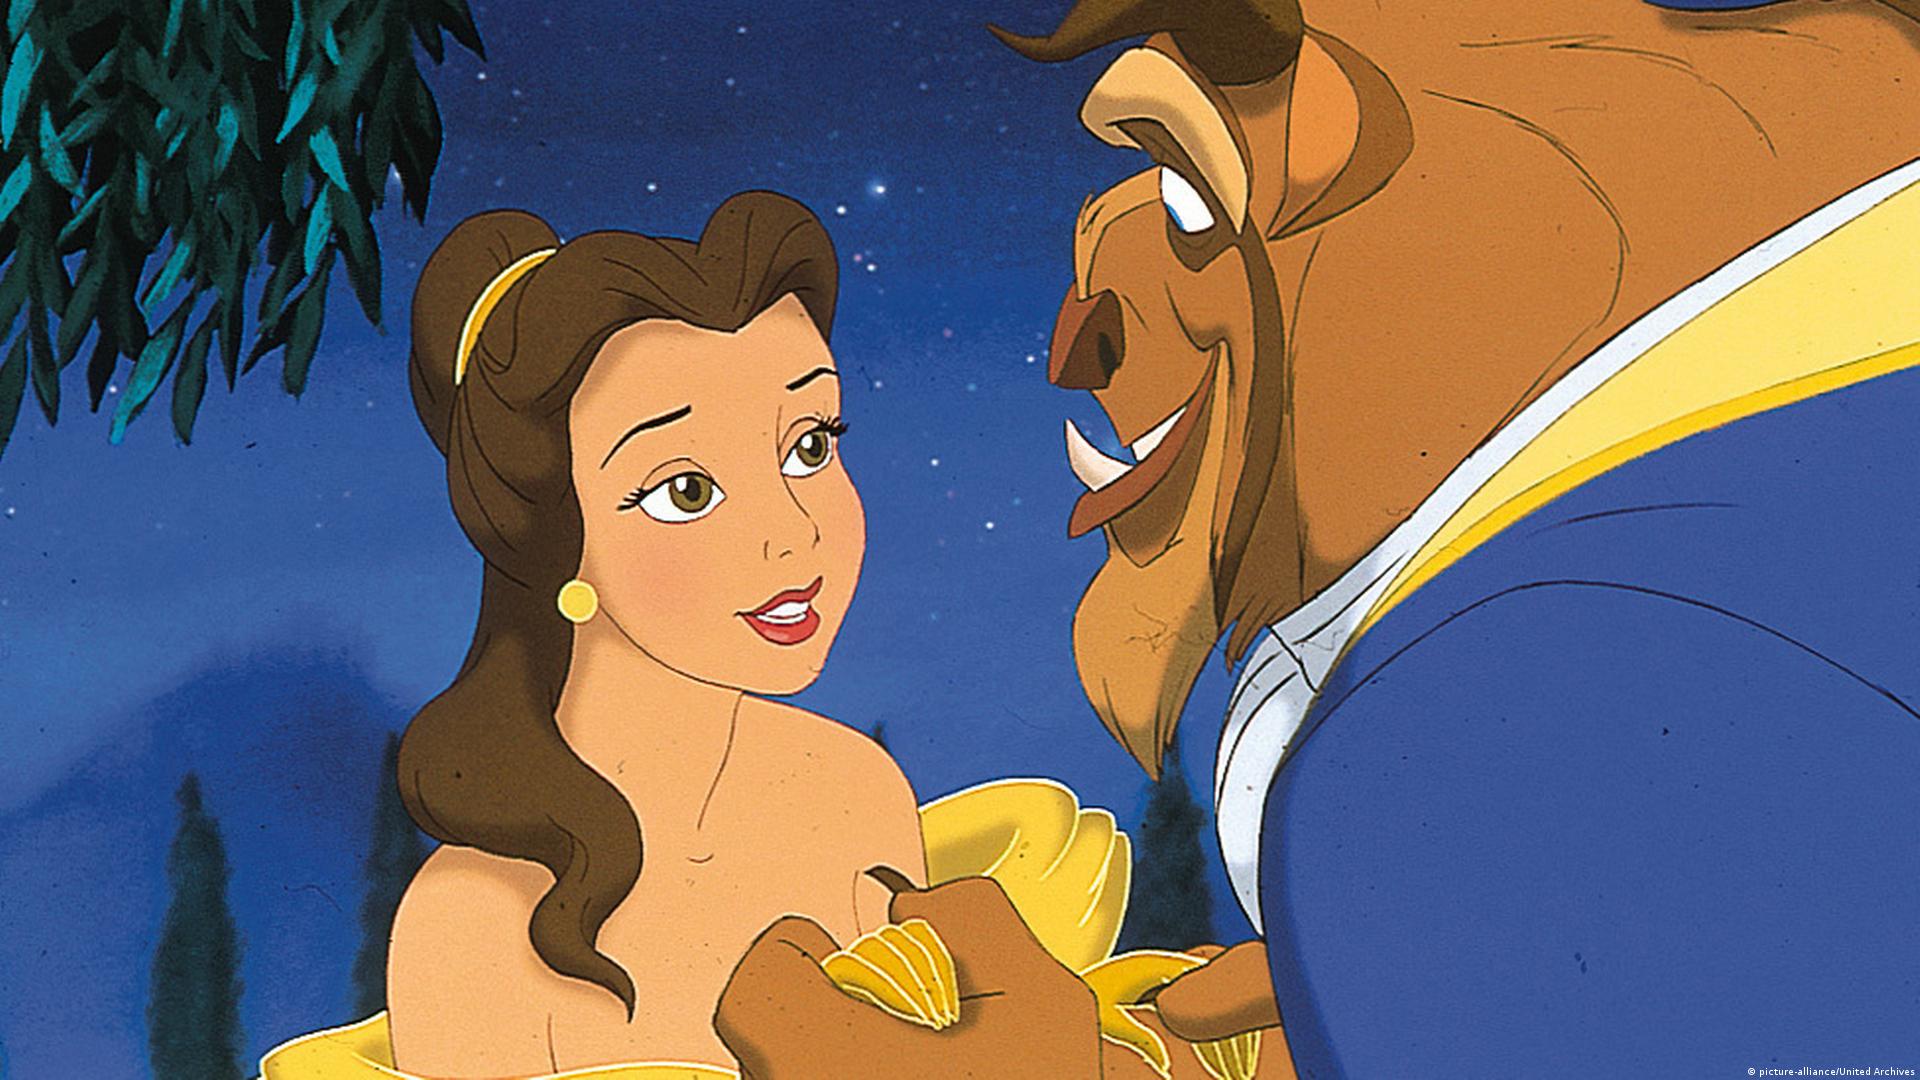 Walt Disney Pornographic - Beauty and the Beast' remakes from soft porn to Disney â€“ DW â€“ 03/15/2017